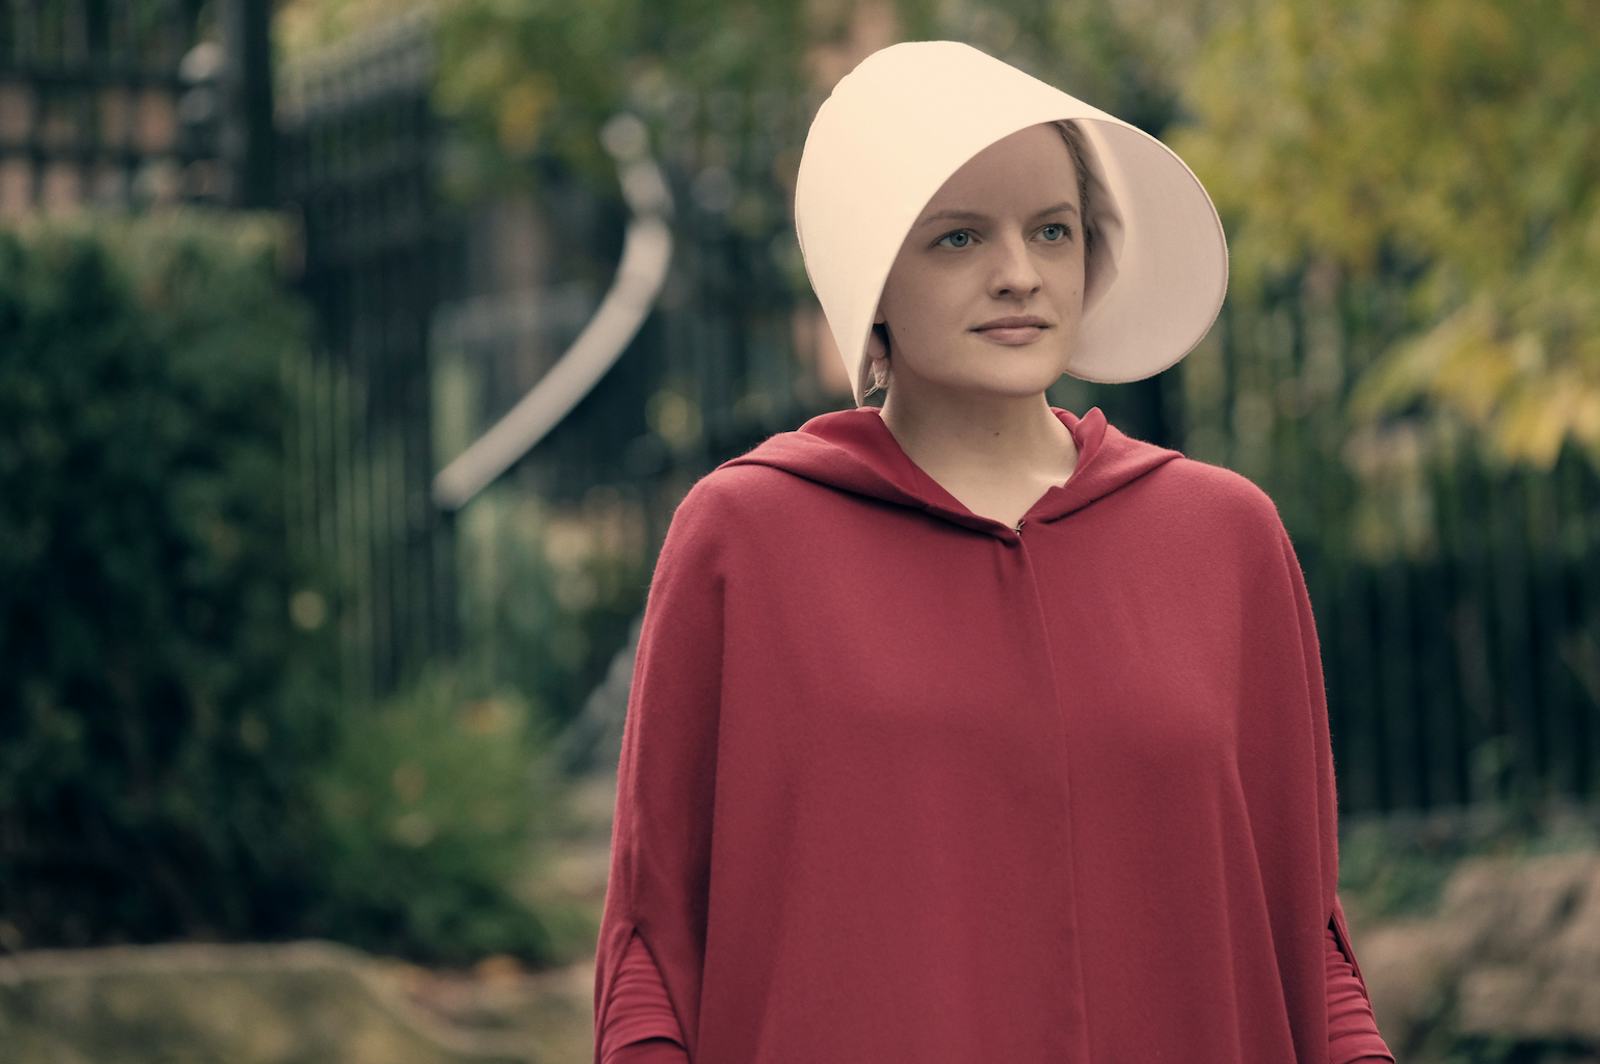 When Does ‘The Handmaid's Tale’ Take Place? The NotSoDistant Future